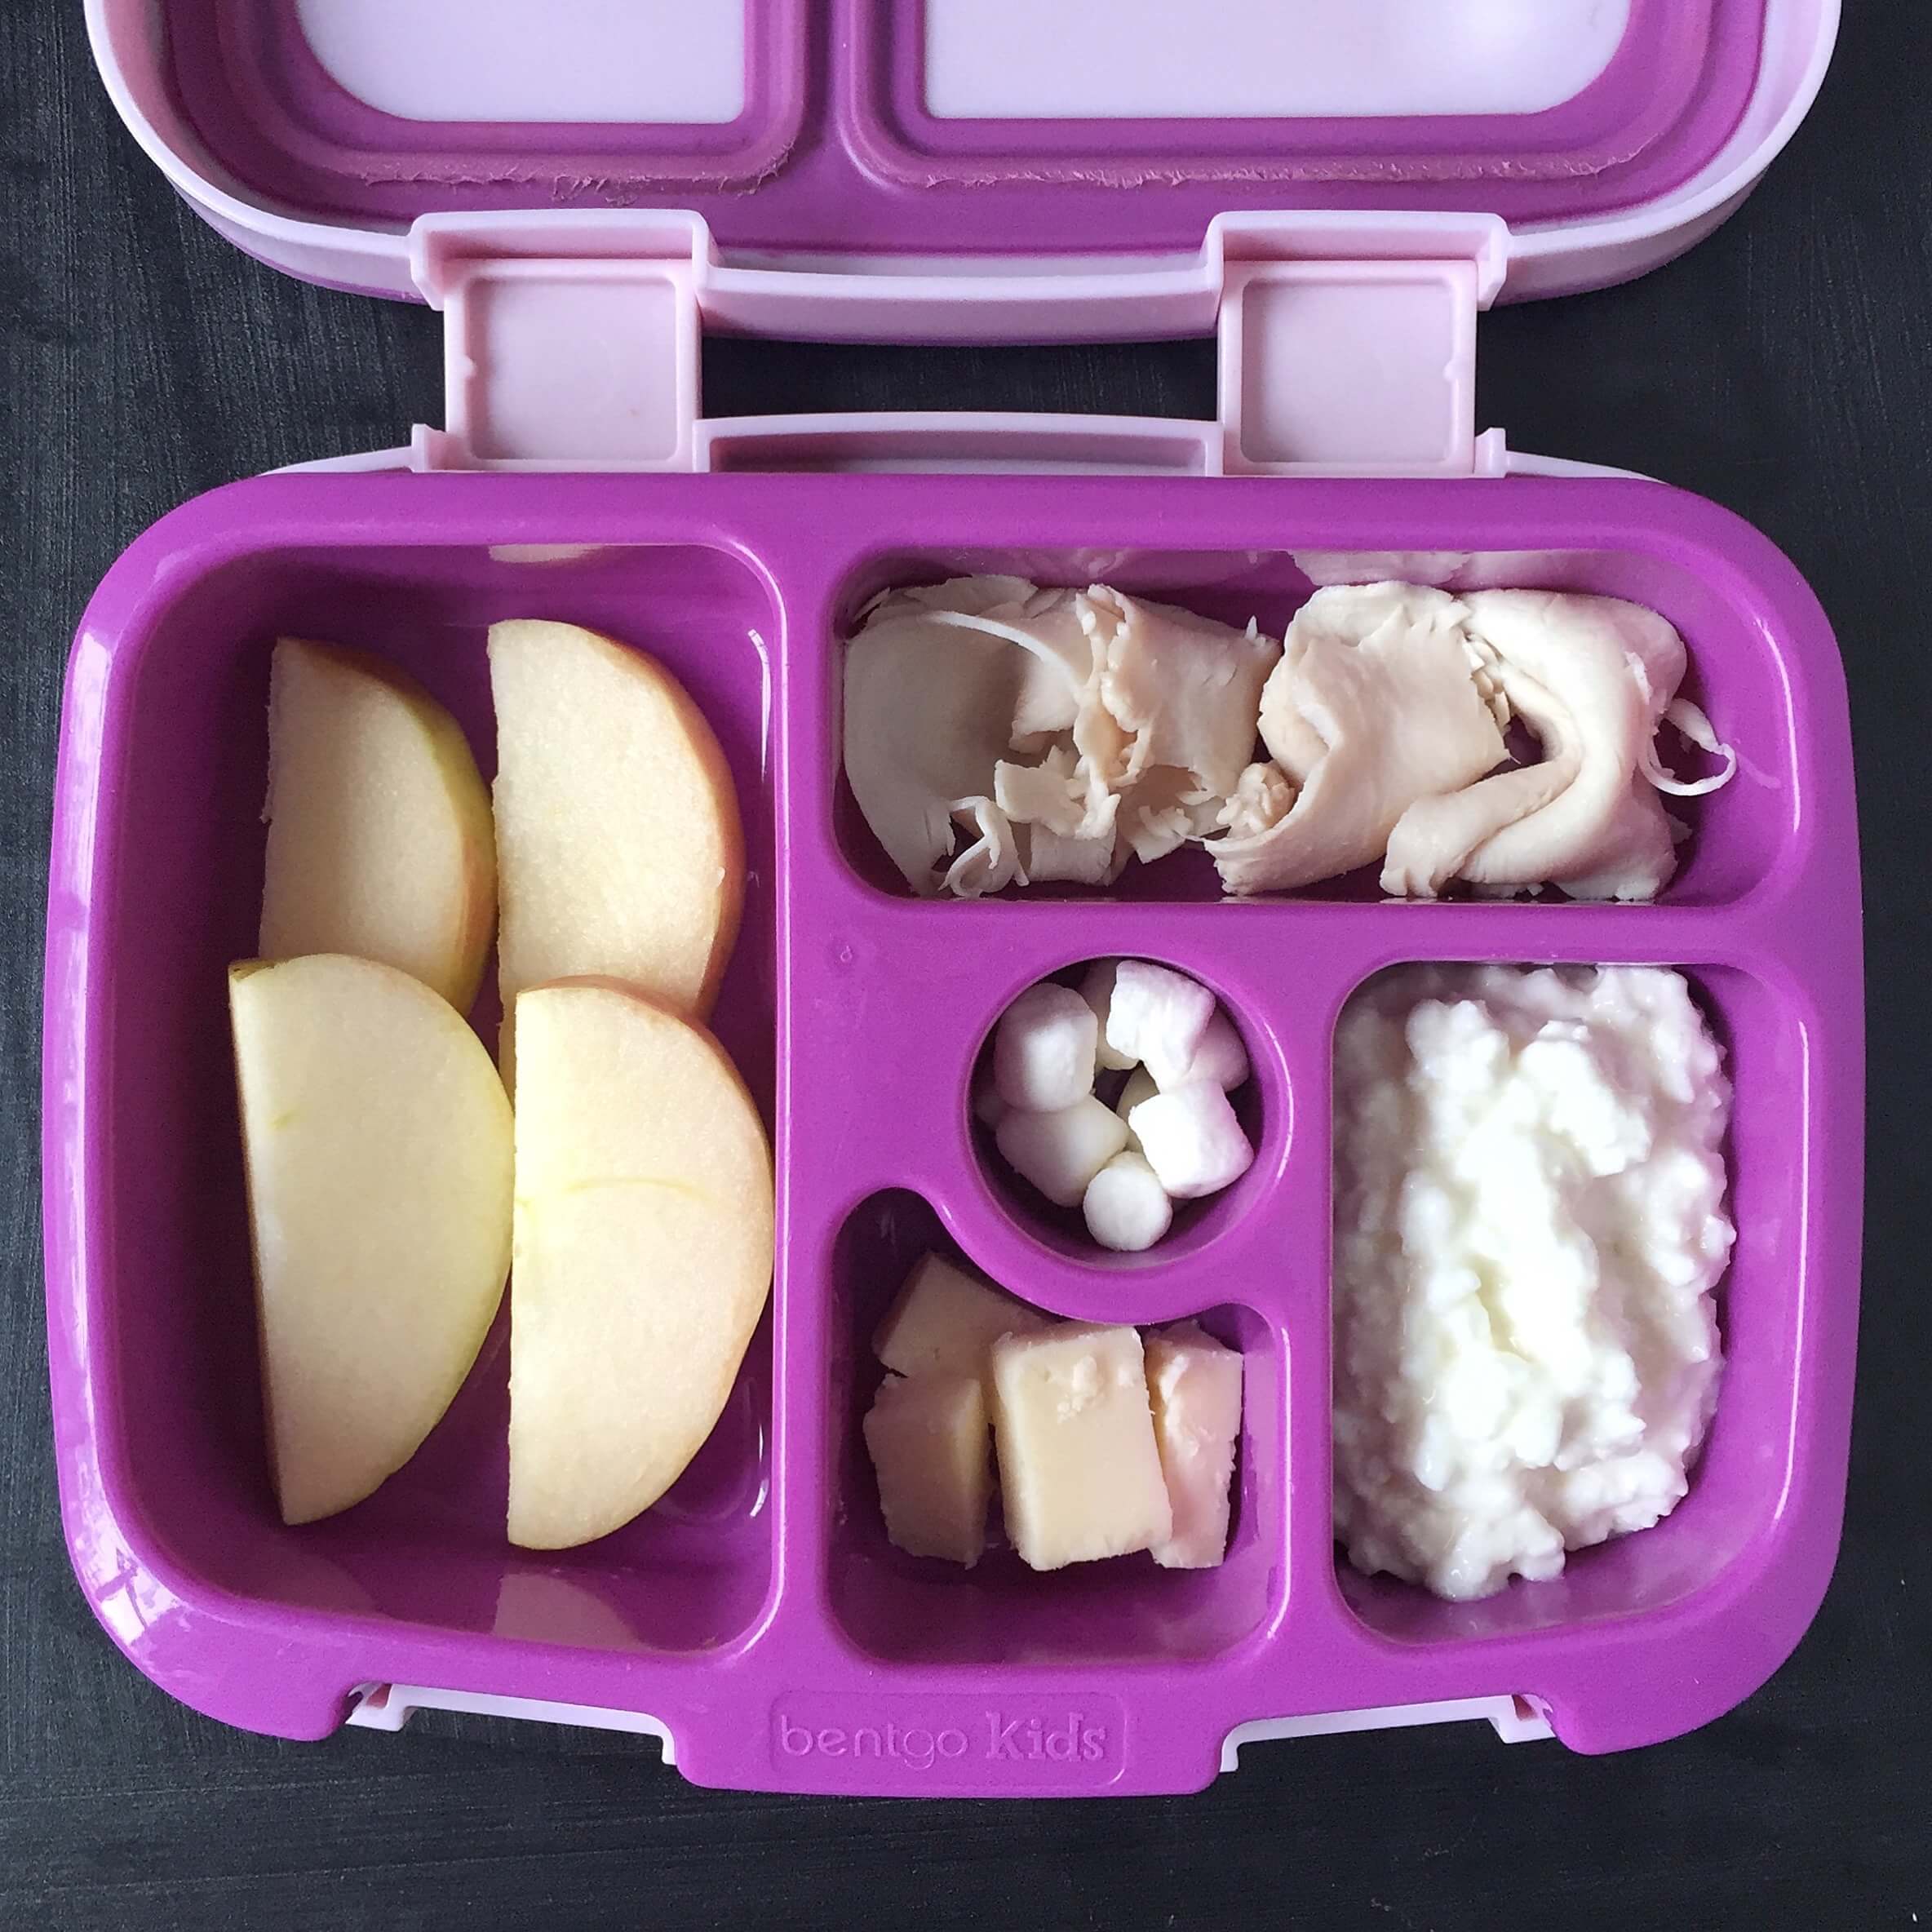 KidLunchBoxes – Lunch box ideas for your family